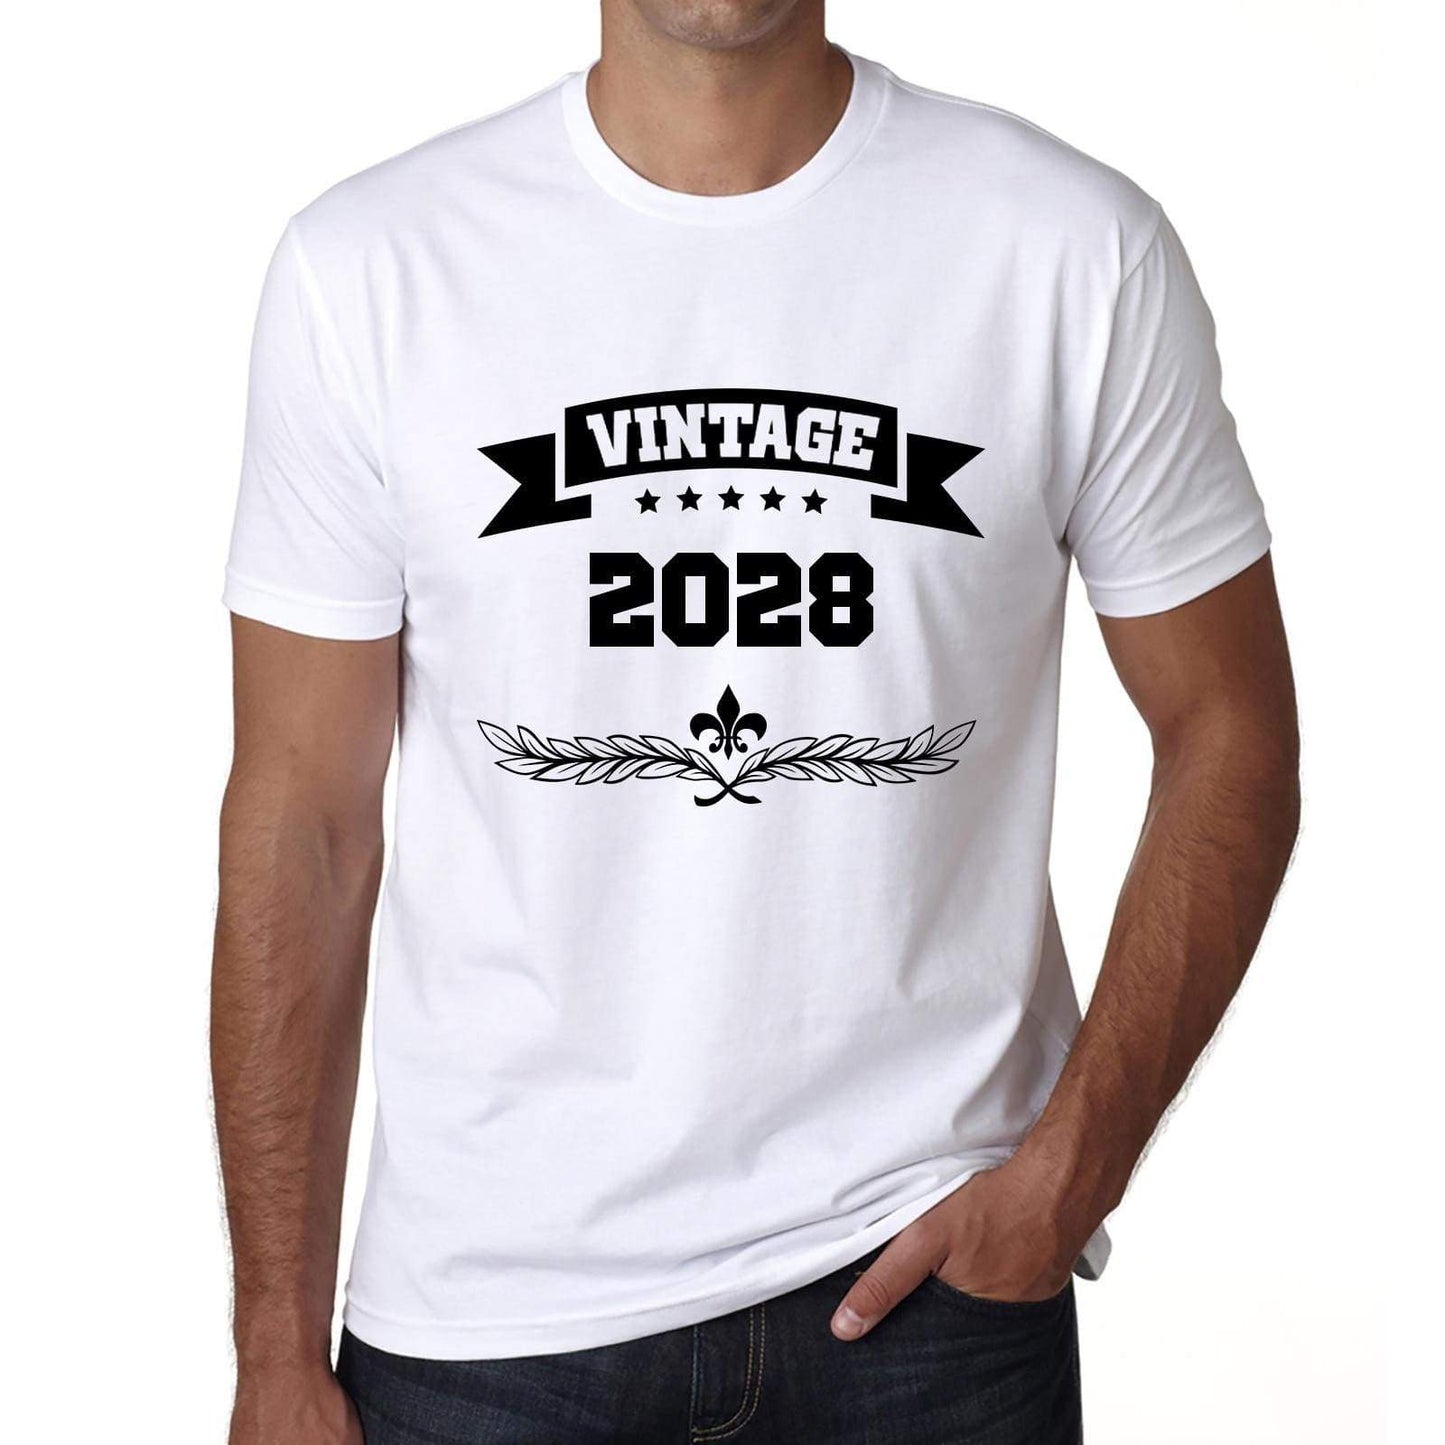 2028 Vintage Year White Mens Short Sleeve Round Neck T-Shirt 00096 - White / S - Casual